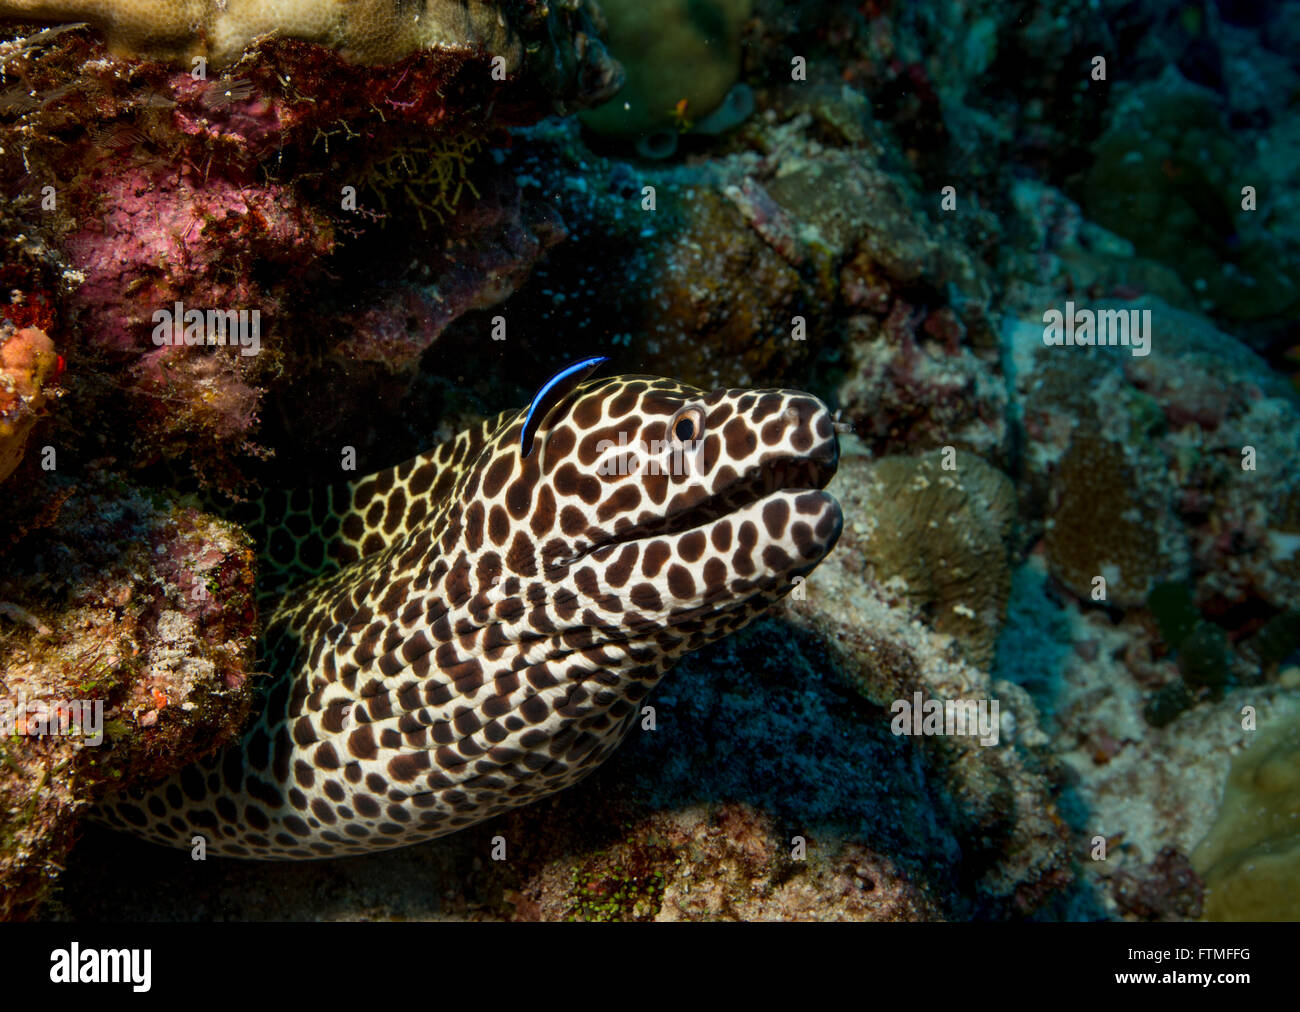 Cleaner wrasse with Honeycomb moray. Stock Photo